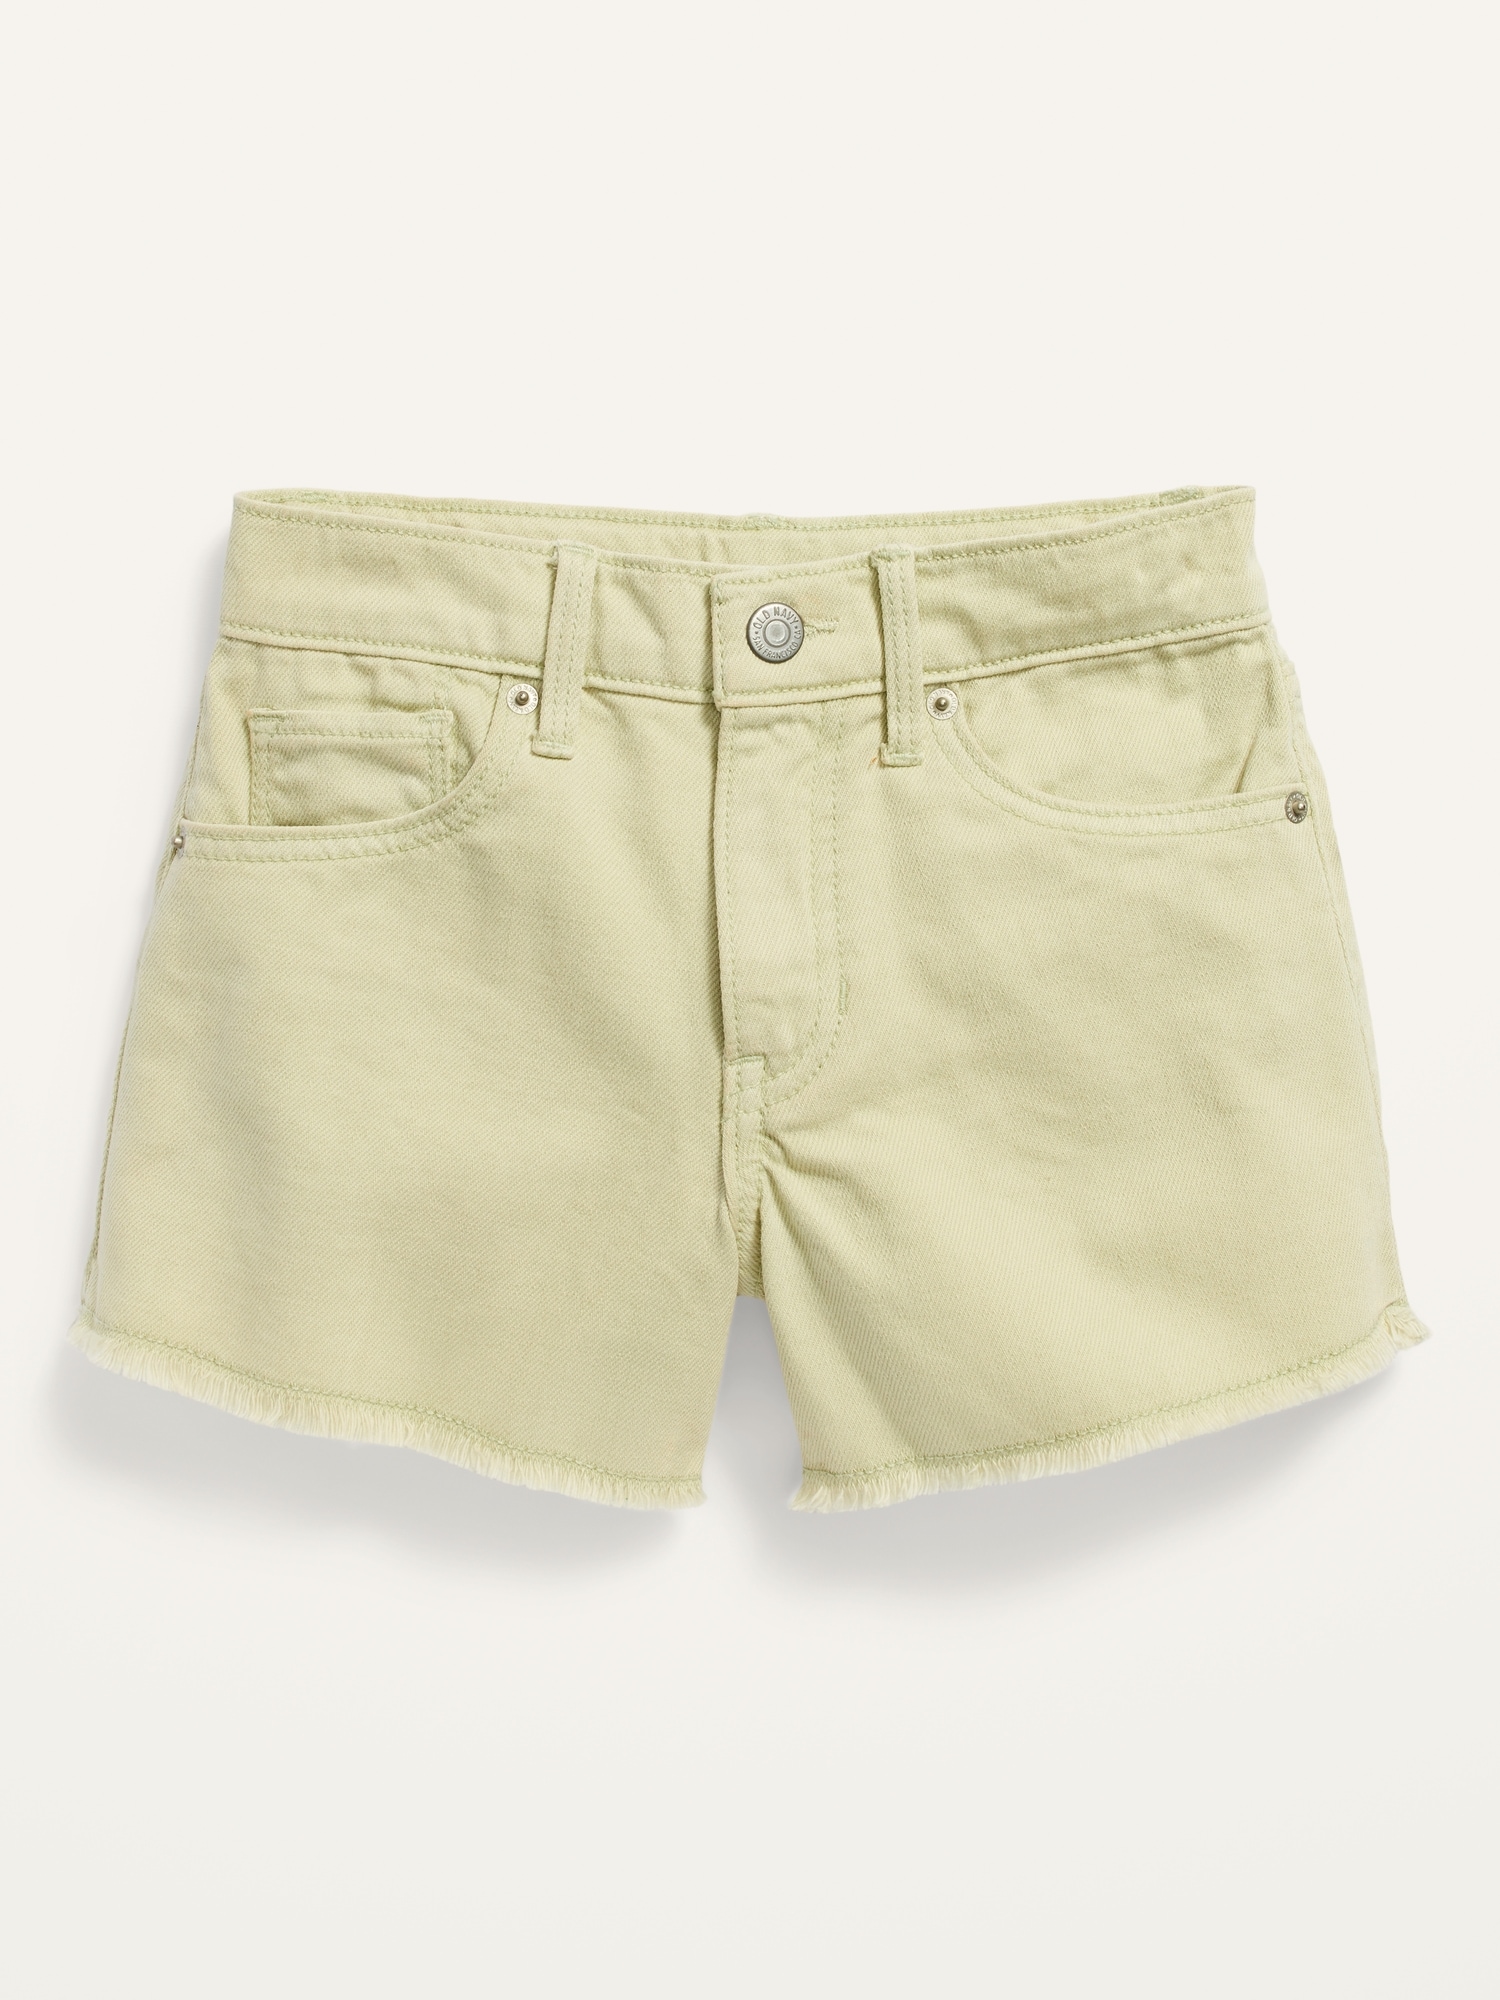 Extra High-Waisted Pop-Color Cut-Off Jean Shorts for Girls